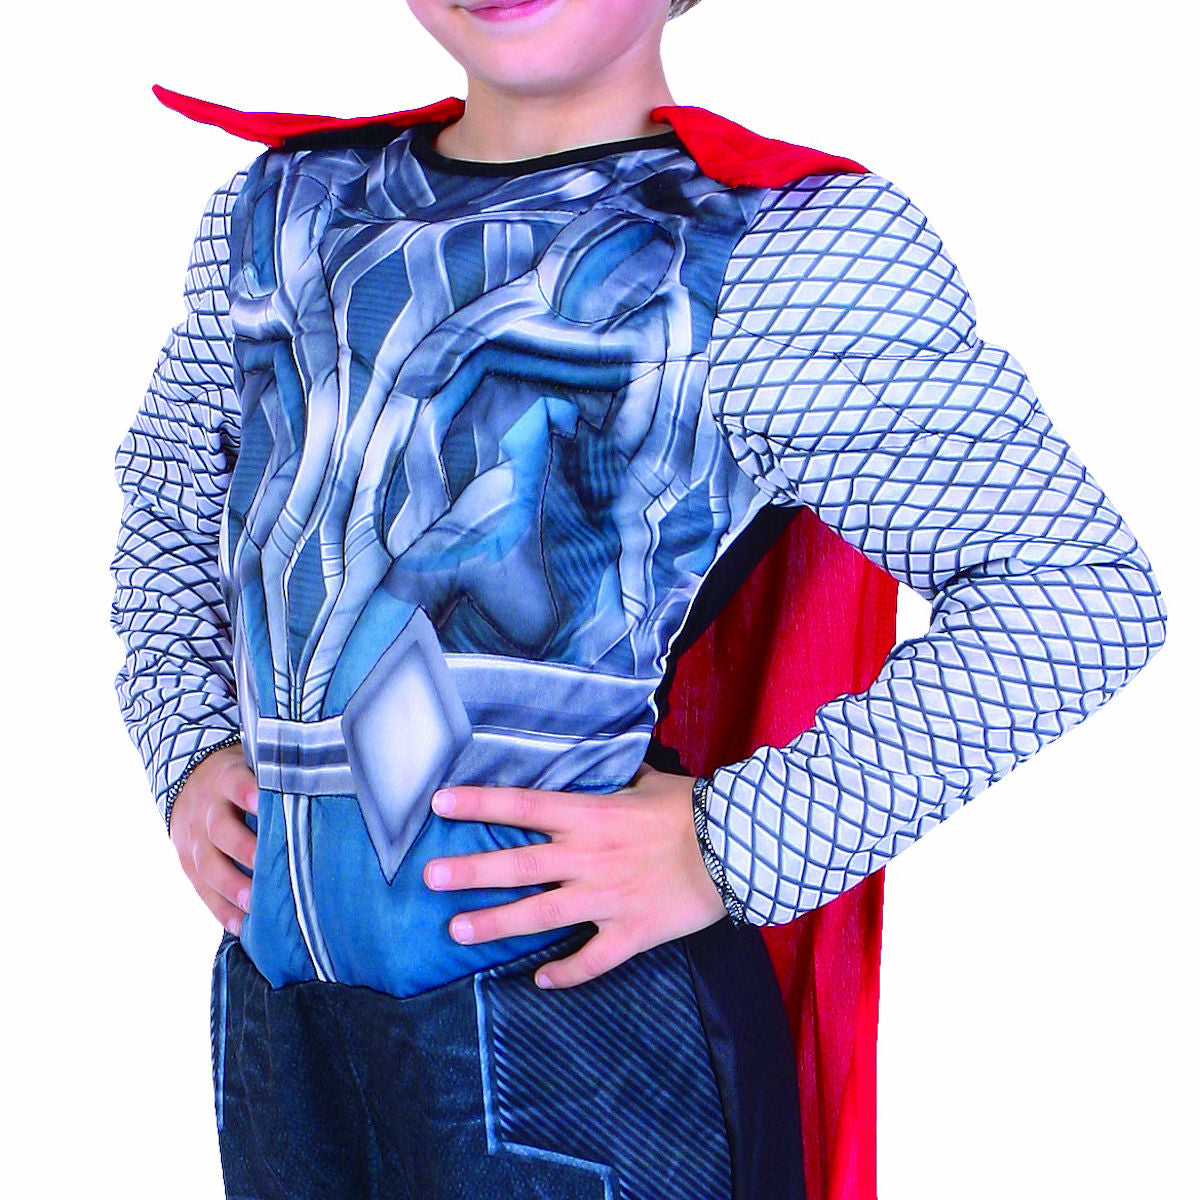 Thor Padded Muscle Jumpsuit  Boys Child Costume Fancy Dress with Cape